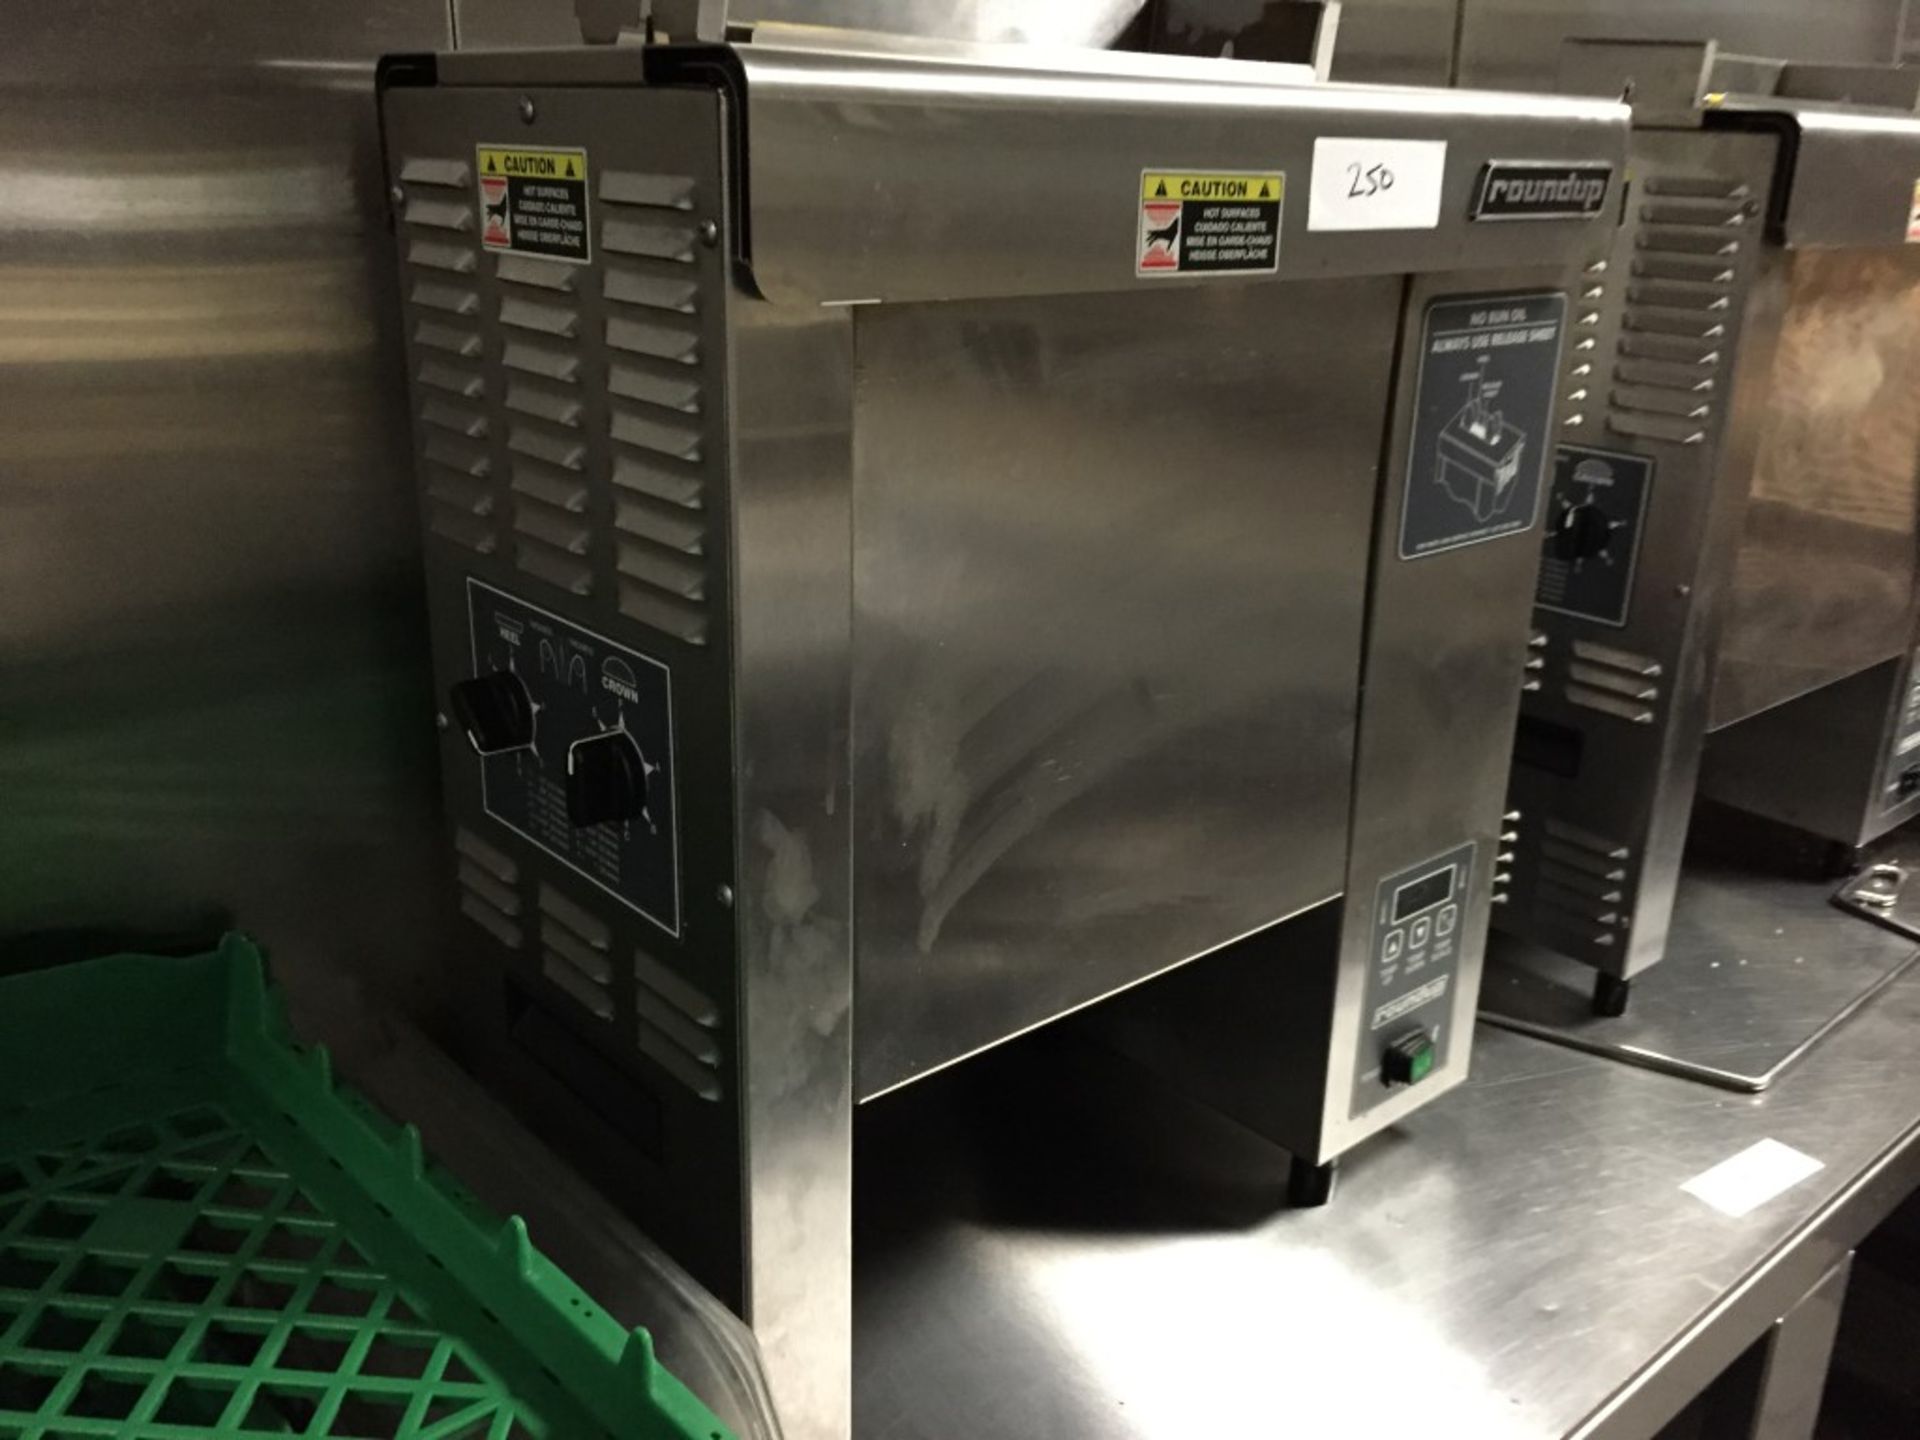 1 x Roundup 9210100 Commercial Stainless Steel Vertical Contact Toaster - Toasts Up To 7000 Slices/ - Image 3 of 3